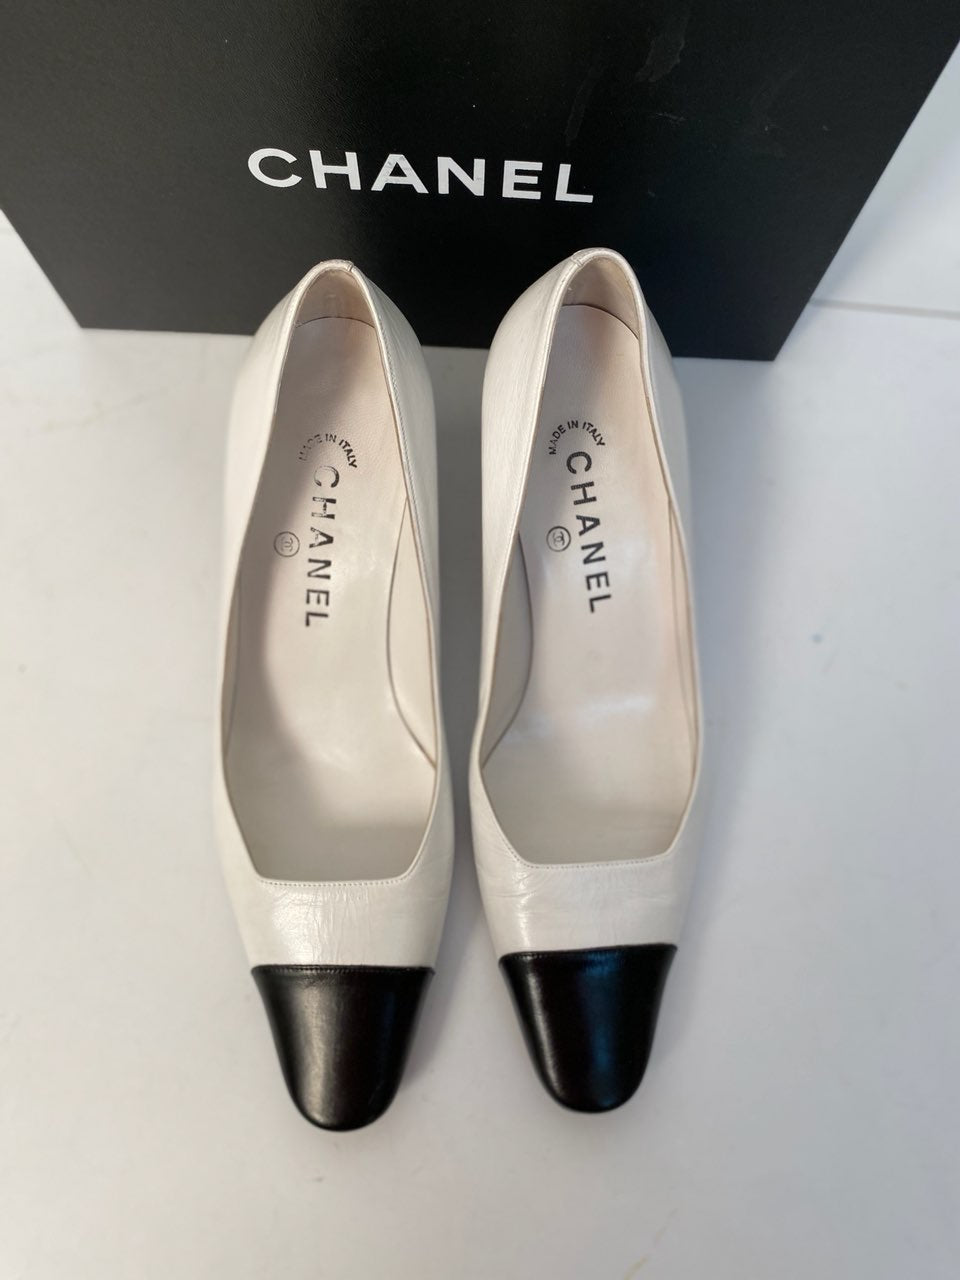 Chanel White/Black Patent Leather CC Mary Jane Wedge Heel Pumps Size 38